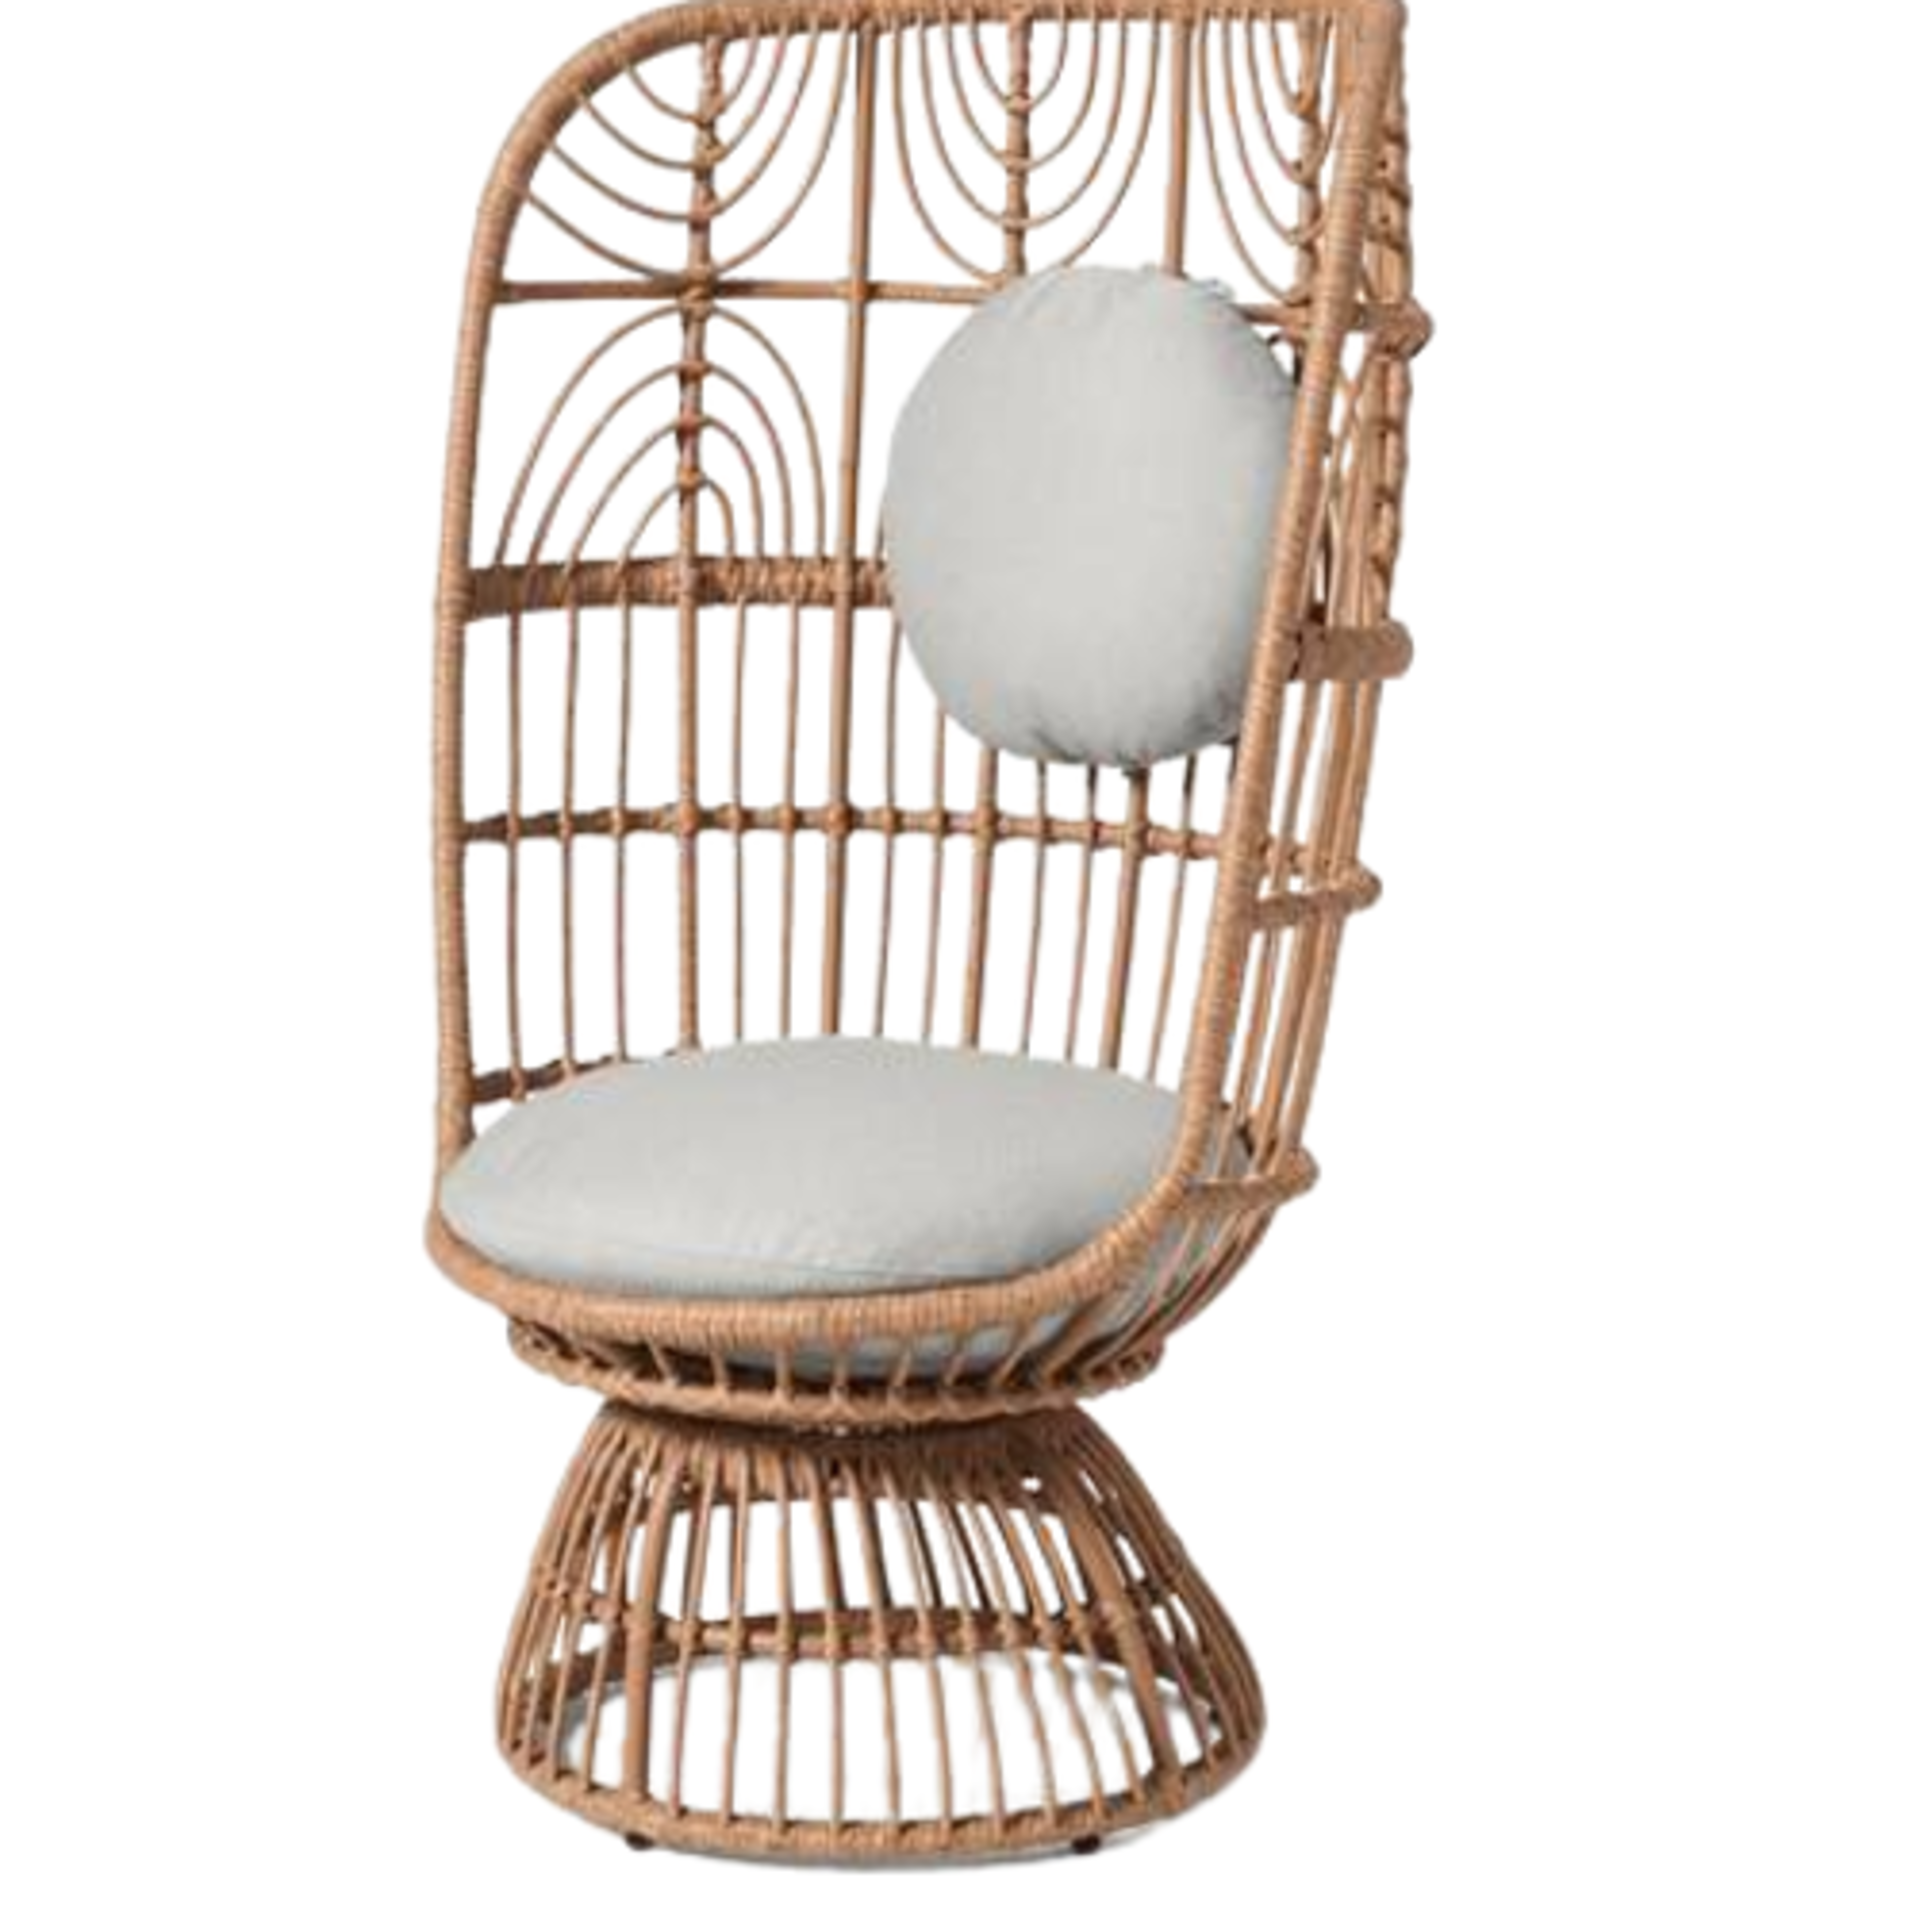 BRAND NEW Made.Com Nairi Garden Accent Chair. RRP £499.00. - Image 3 of 3